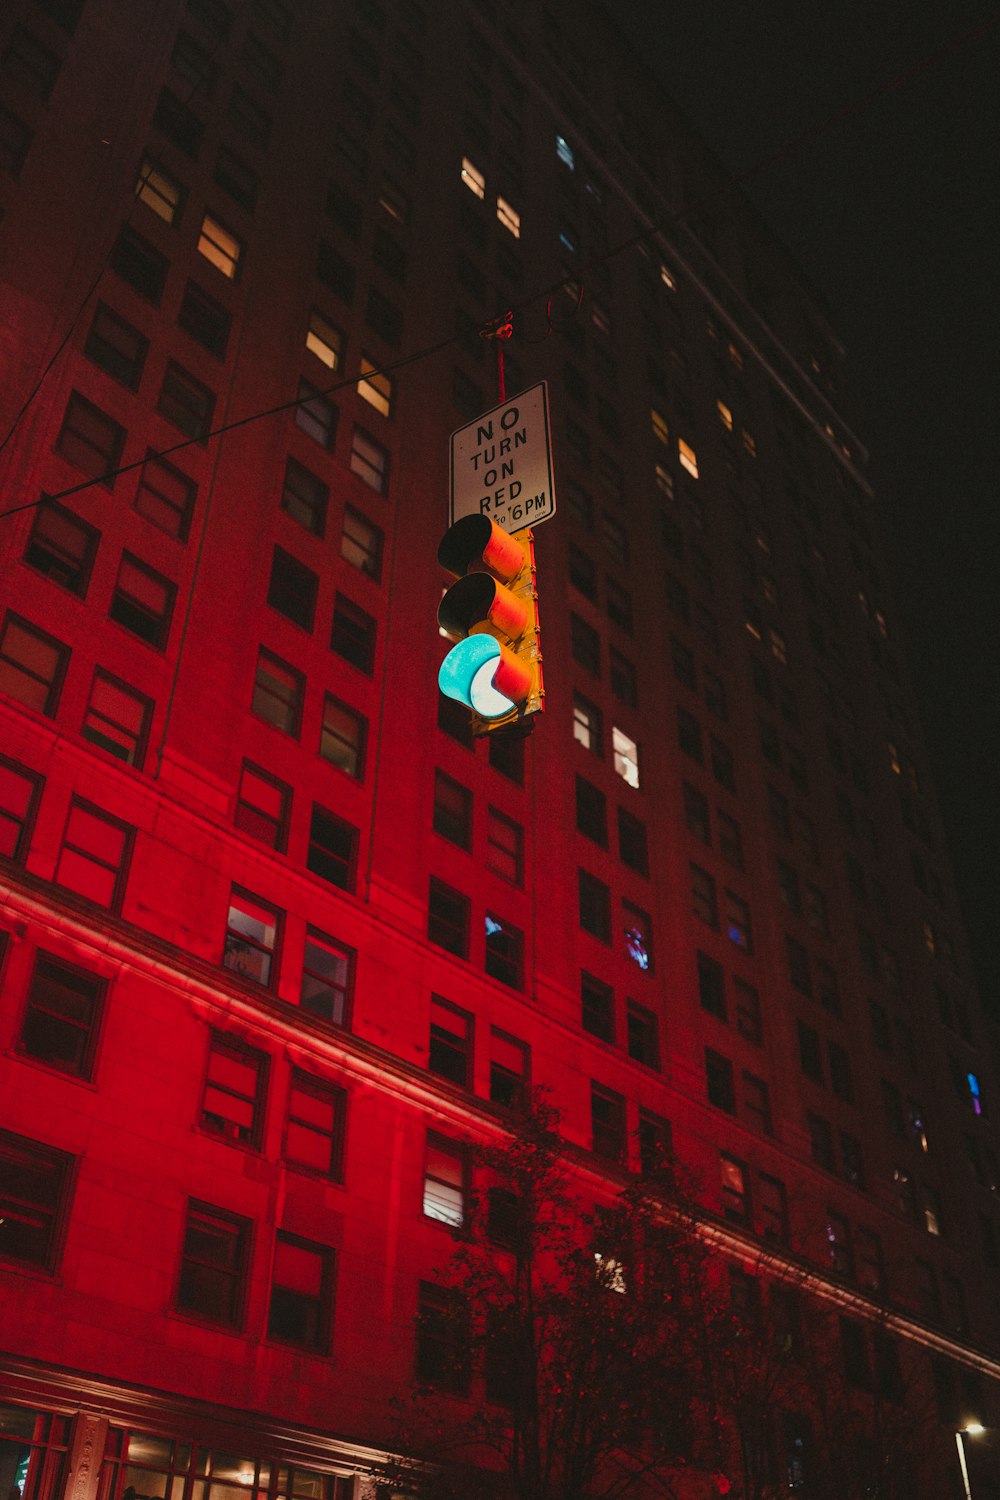 a stop light in front of a tall building